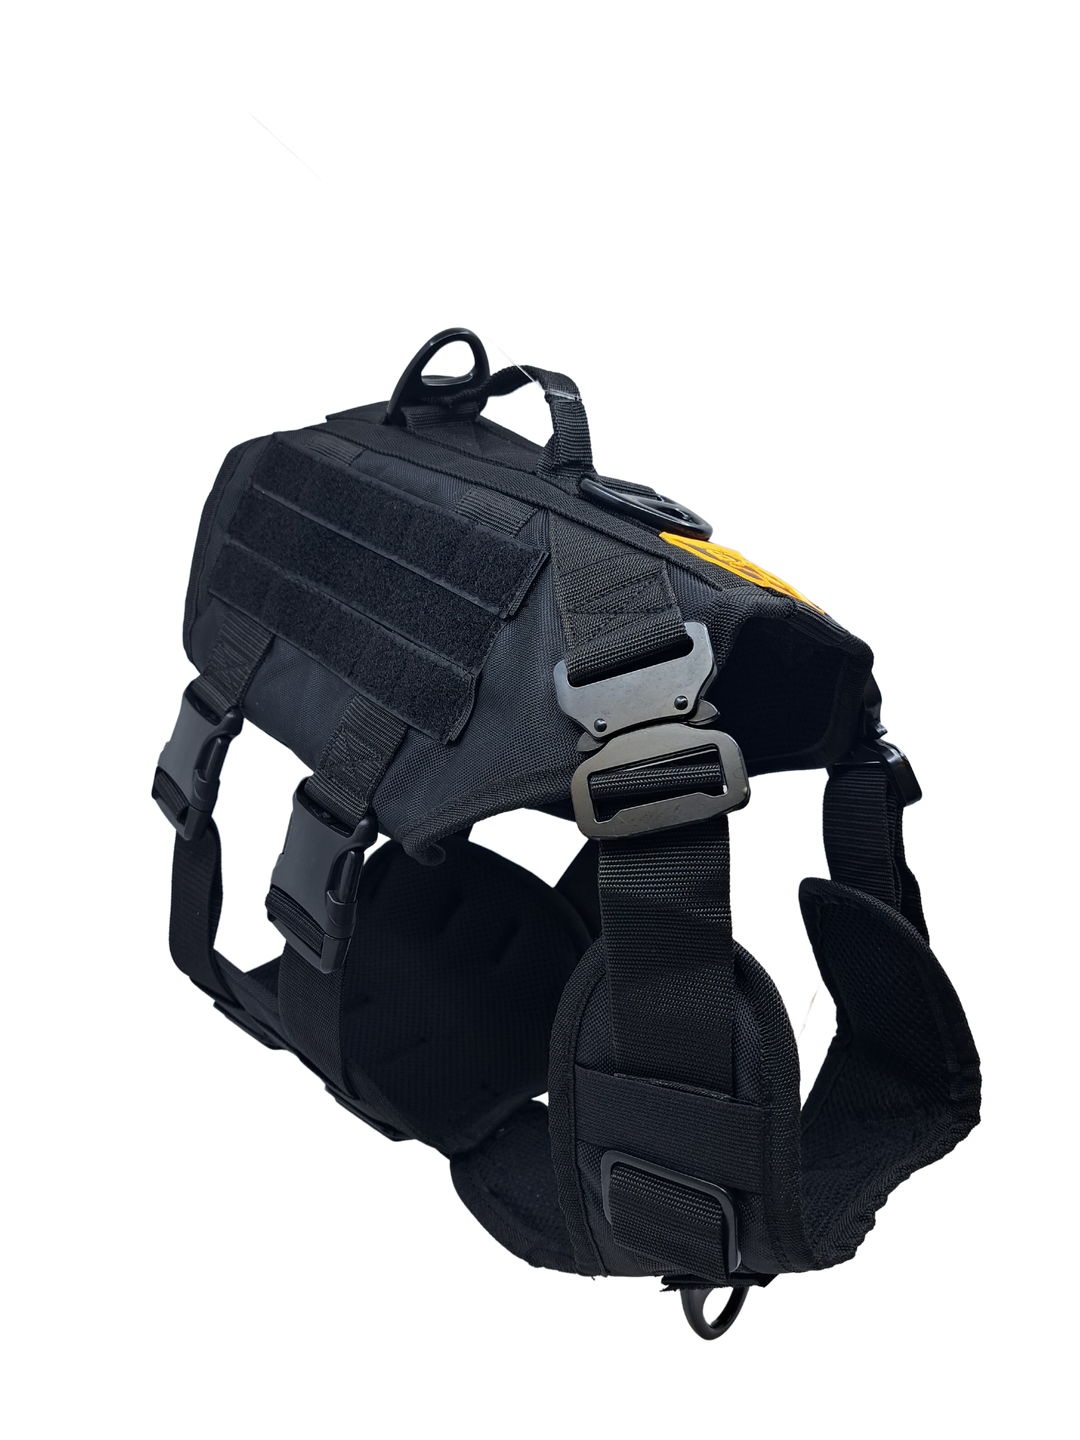 GK9 Tactical Harness